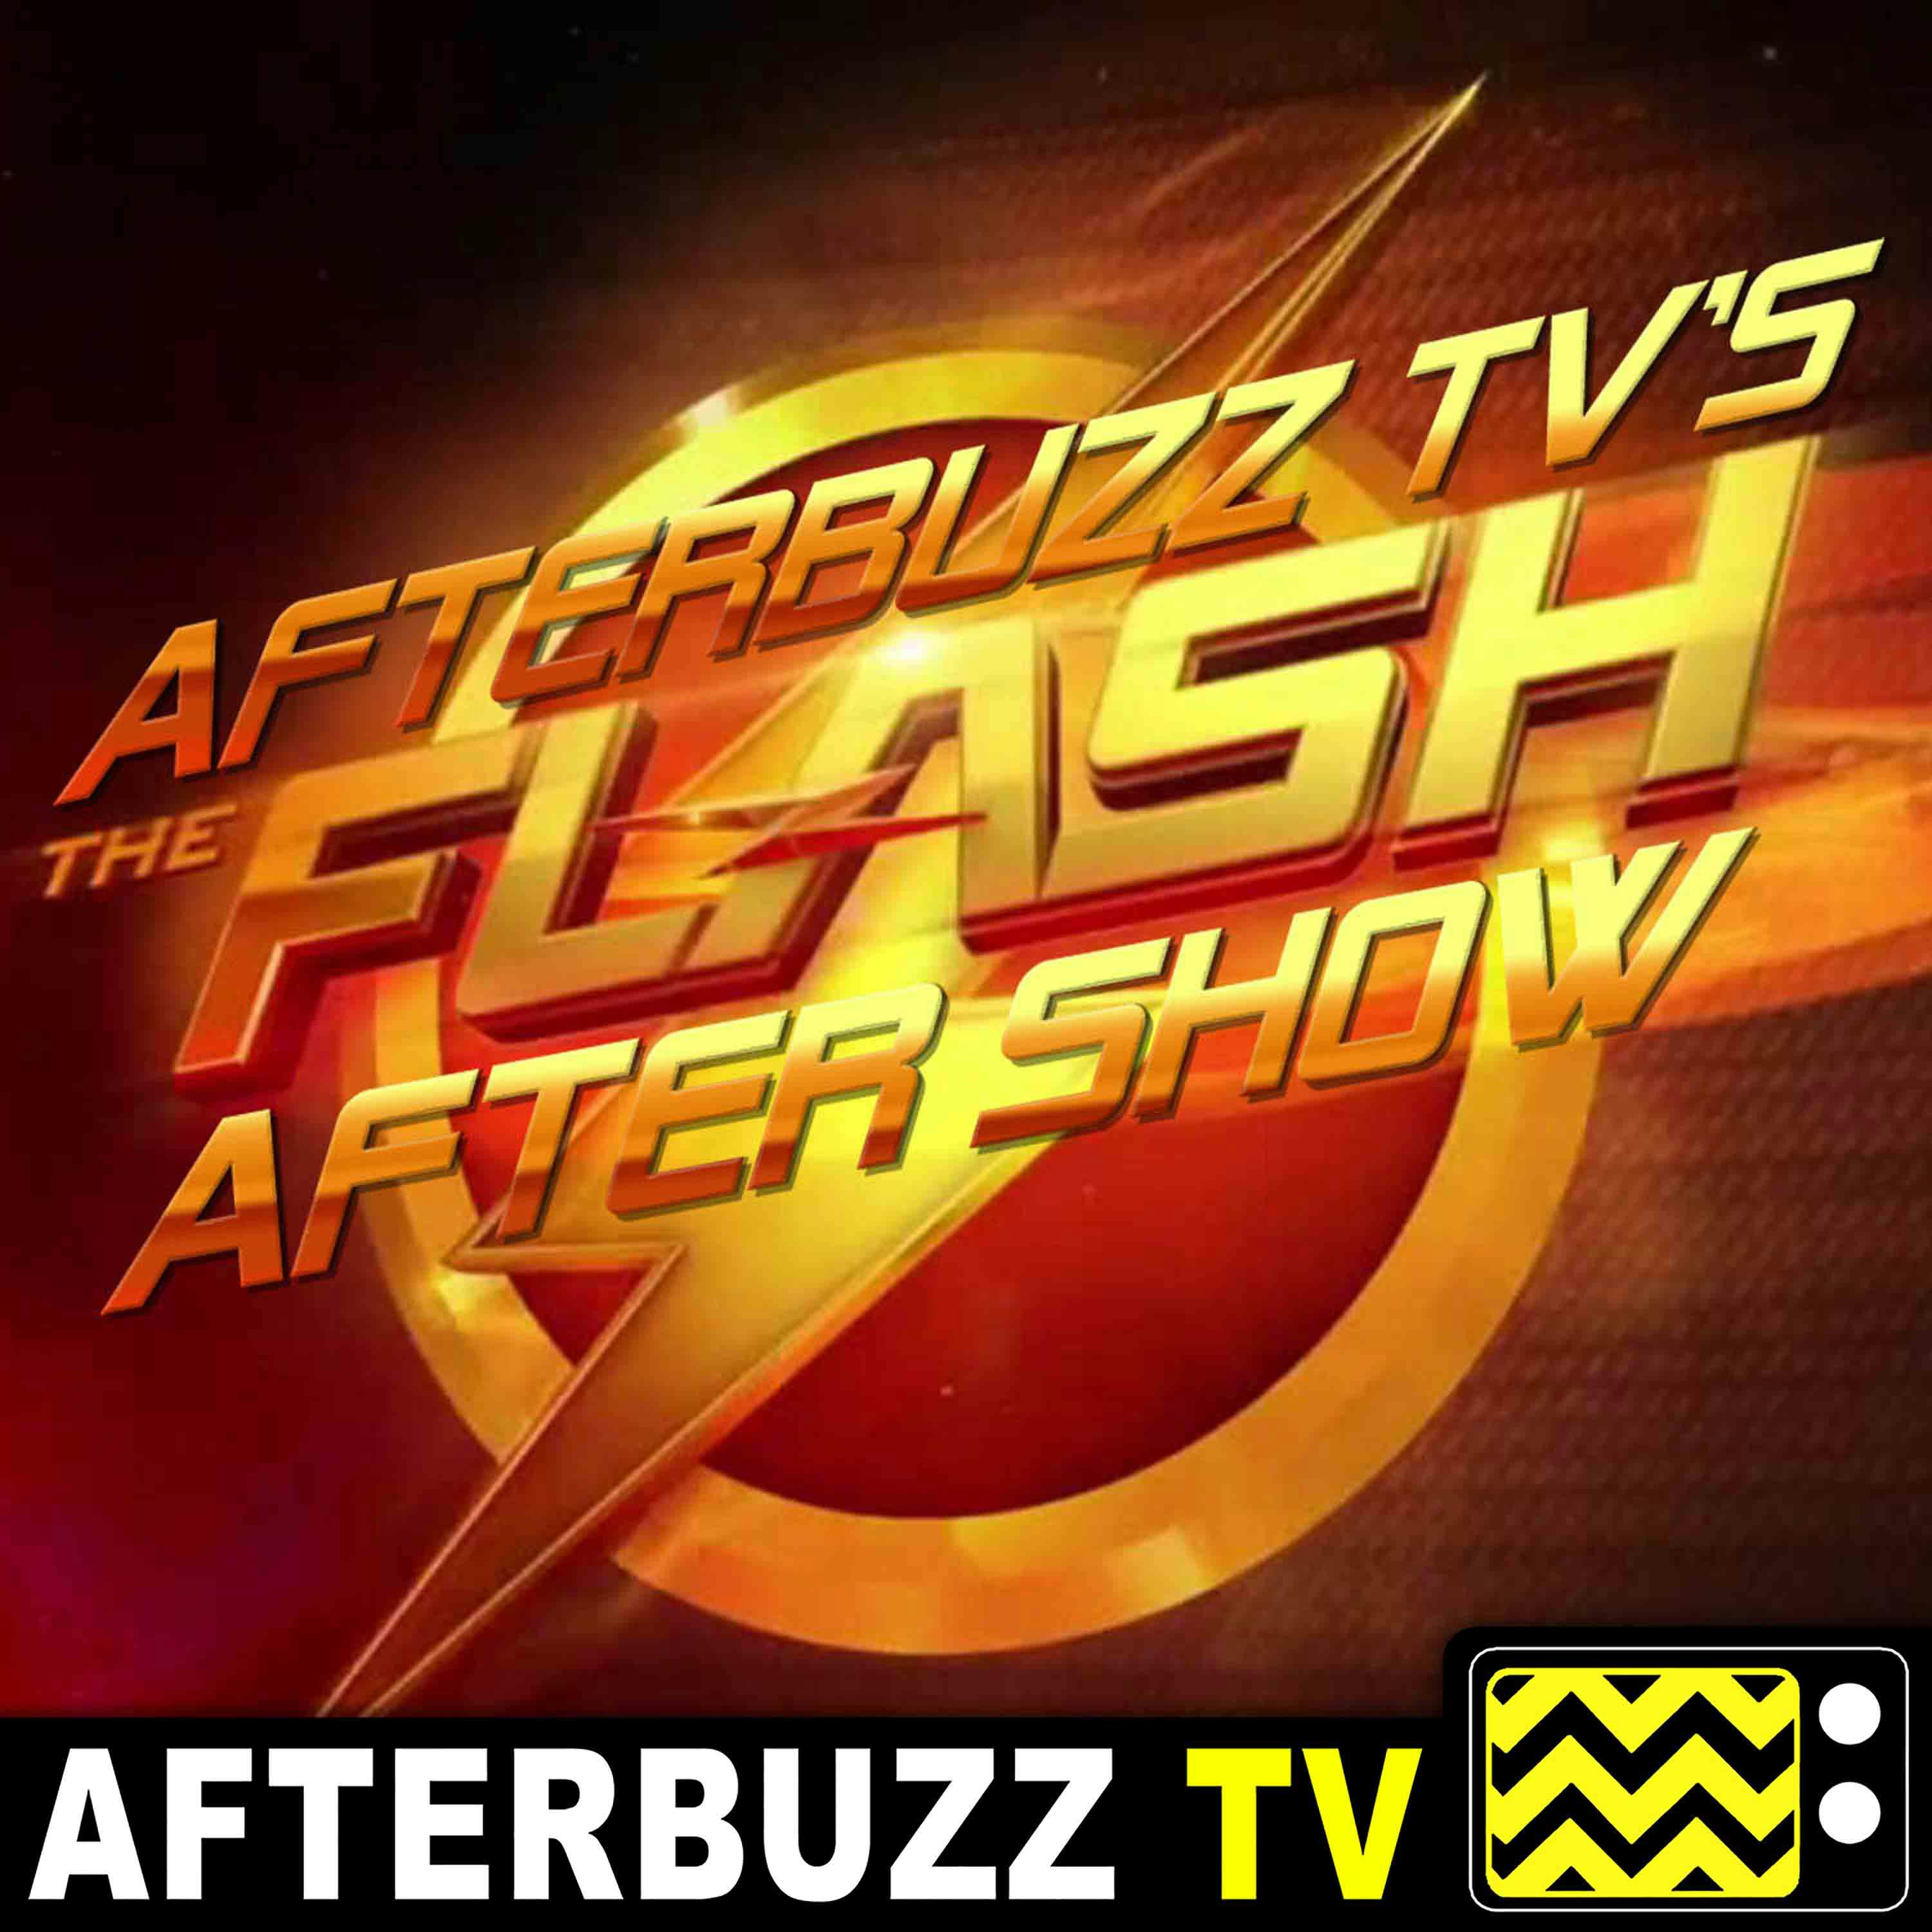 The Flash is losing his speed while Joe West is being hunted! - S6 E16 ‘The Flash’ Recap & After Show